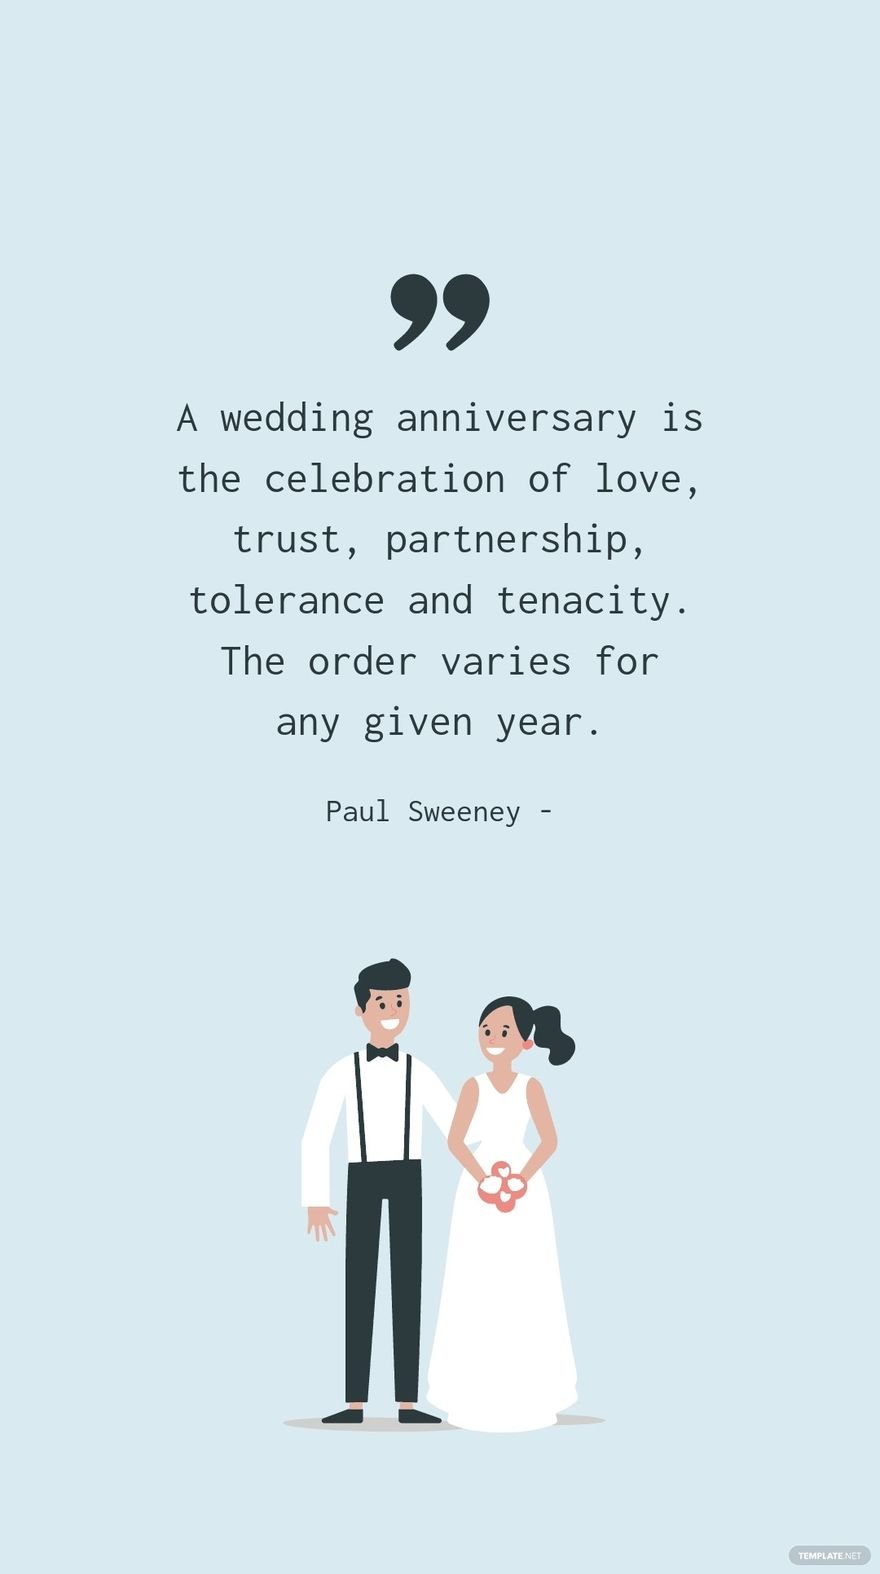 Paul Sweeney - A wedding anniversary is the celebration of love, trust, partnership, tolerance and tenacity. The order varies for any given year.